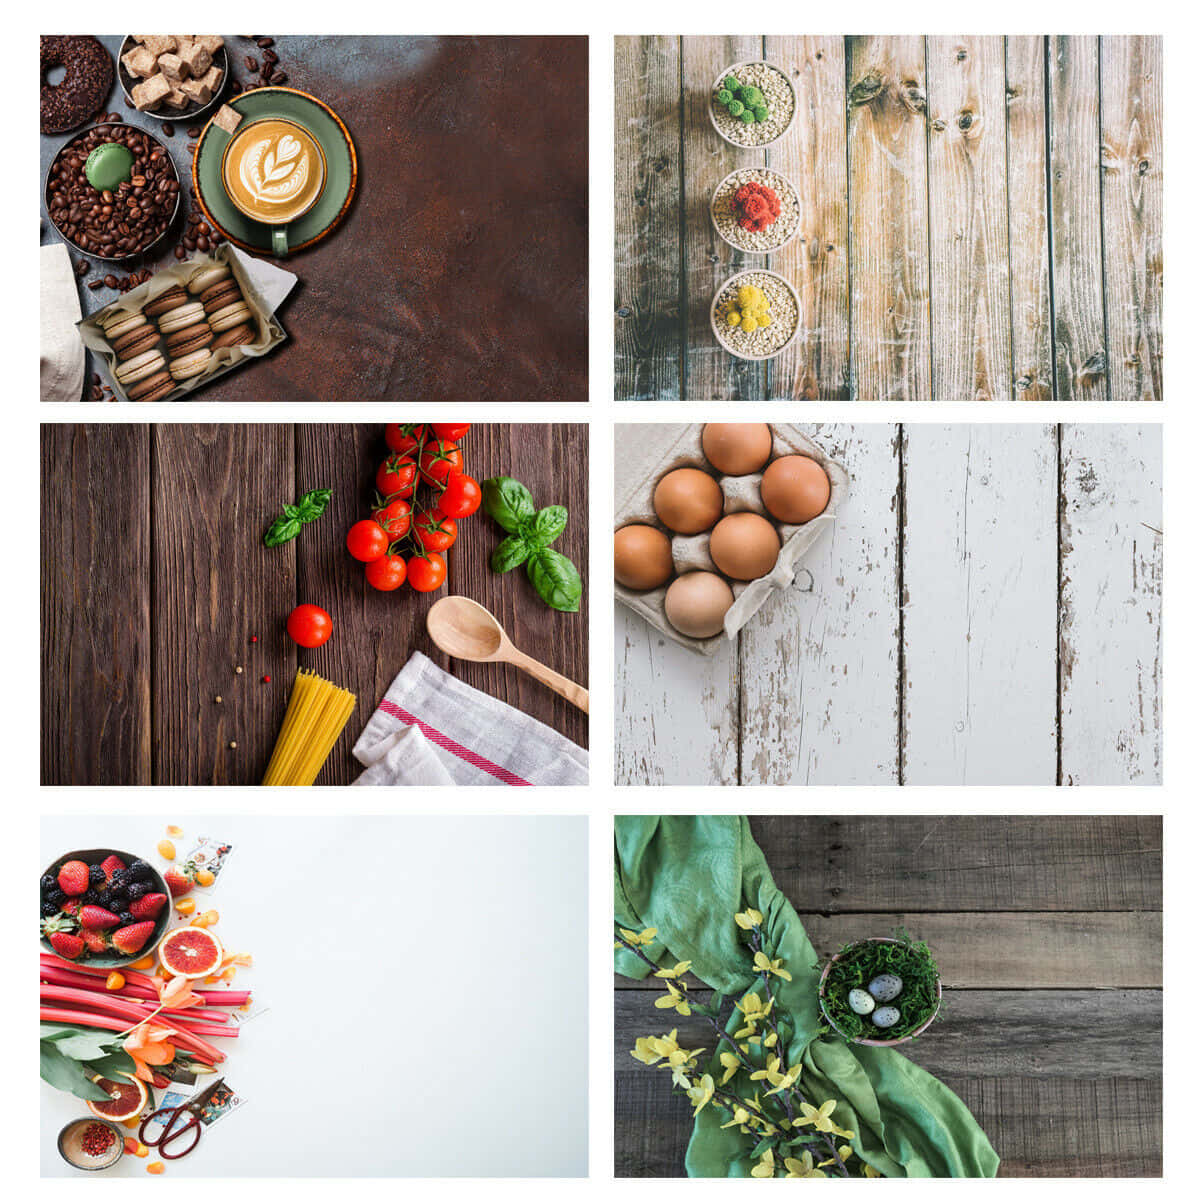 A Collage Of Pictures Of Food On A Wooden Table